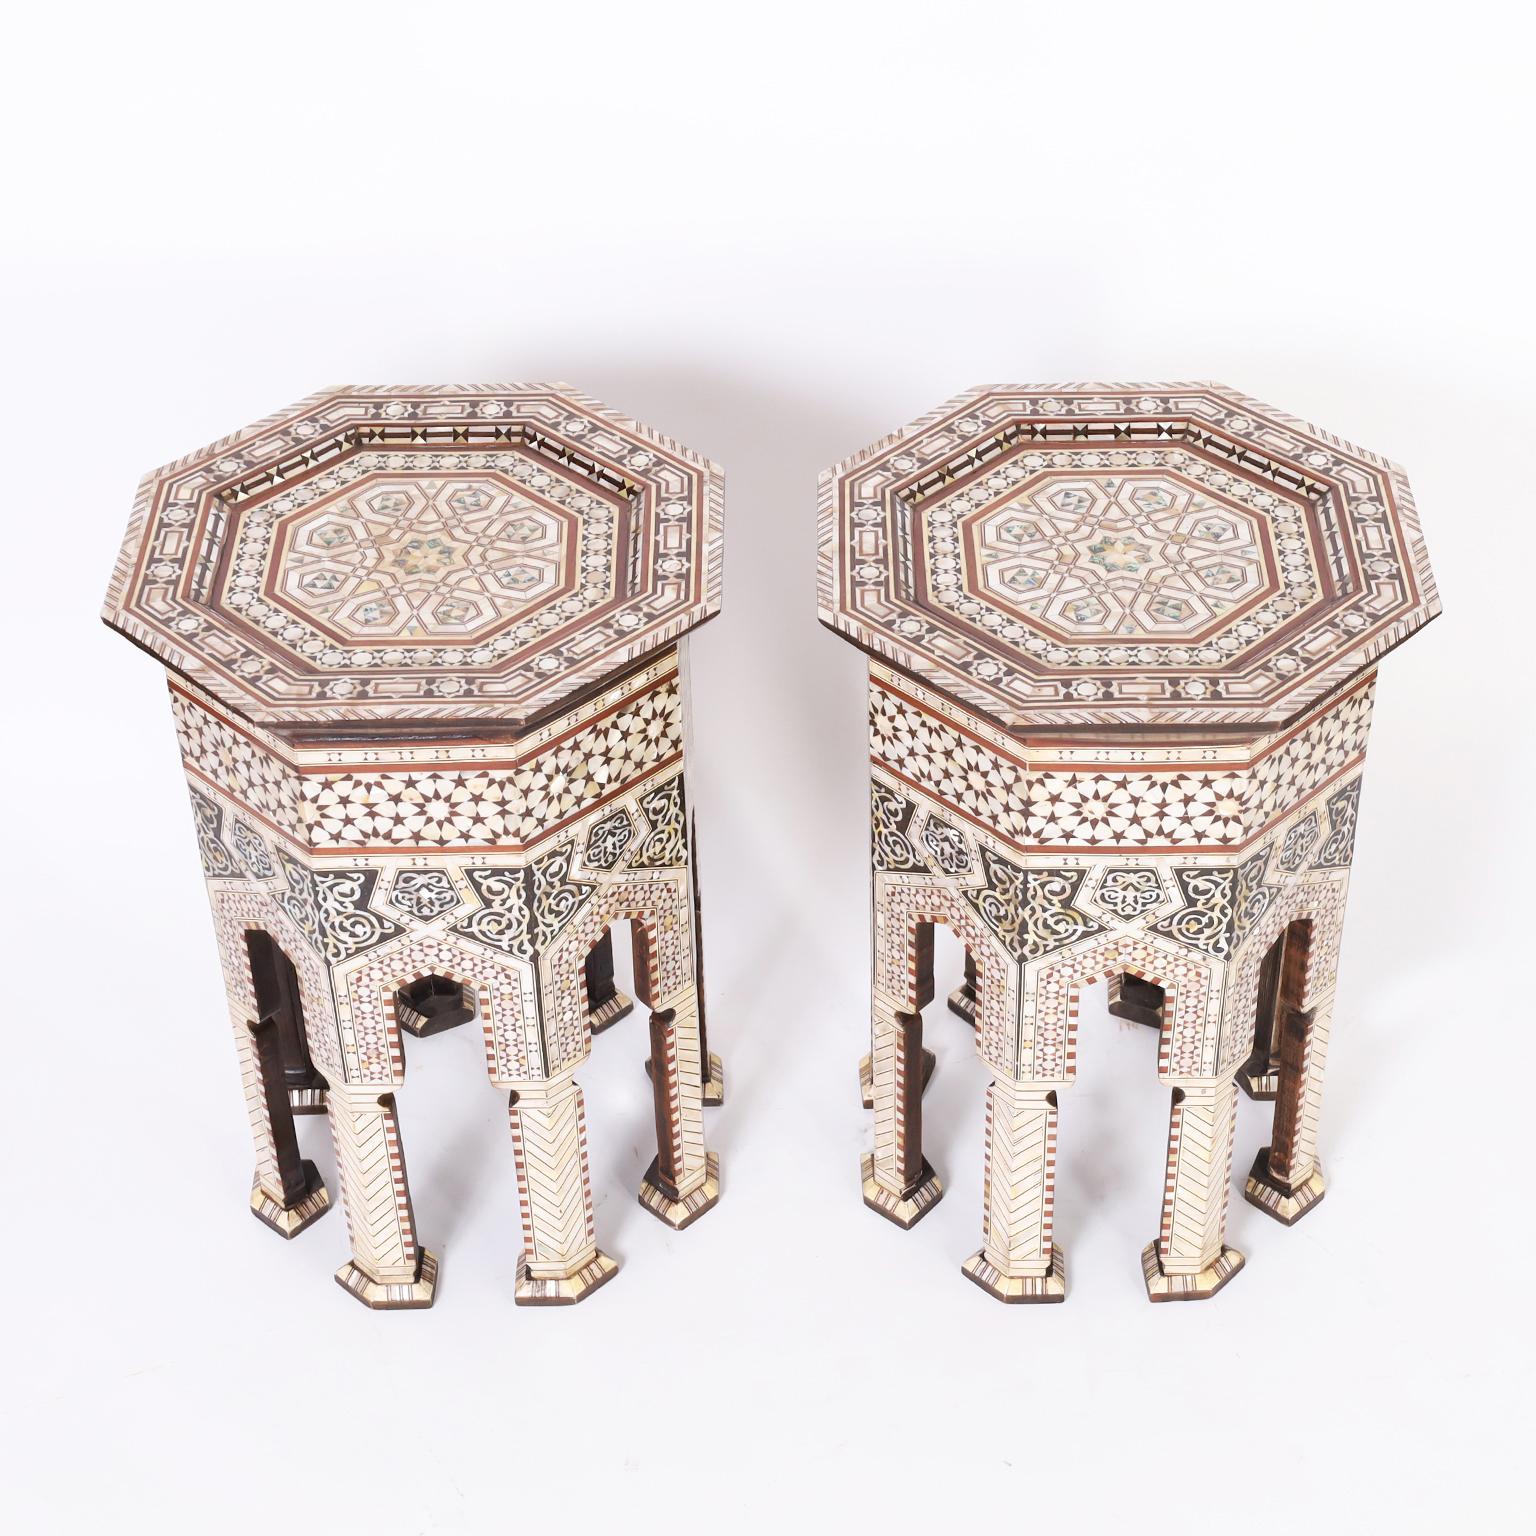 Ultimate pair of Moroccan stands crafted in walnut having octagon tops ambitiously inlaid with geometric designs in mother of pearl, penshell, ebony, and mahogany that continues over the eight sided bases having moorish arches and stylized pad feet. 